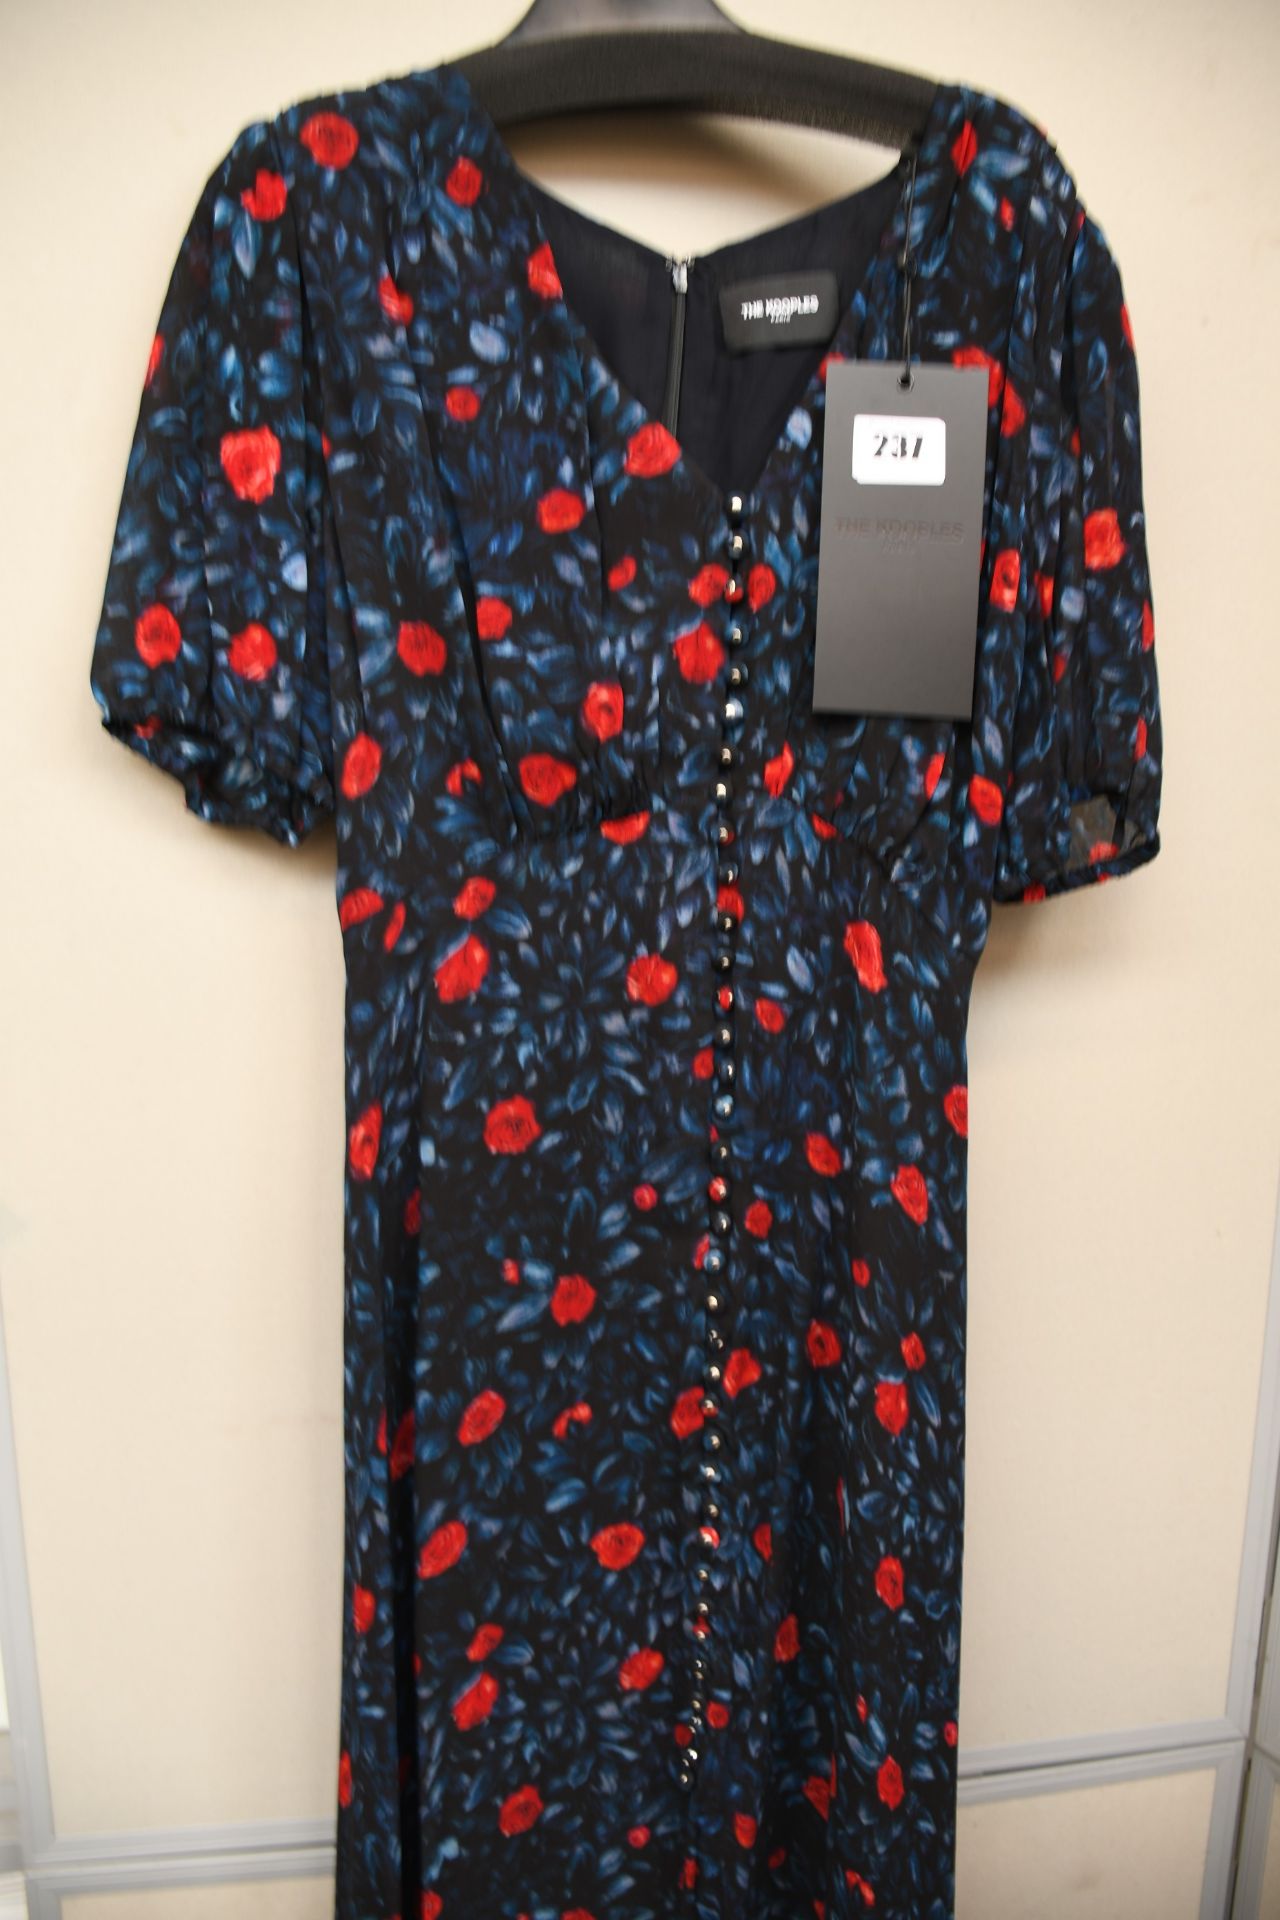 An as new The Kooples Poison Roses on Georgette dress (Size 1 - RRP £318).